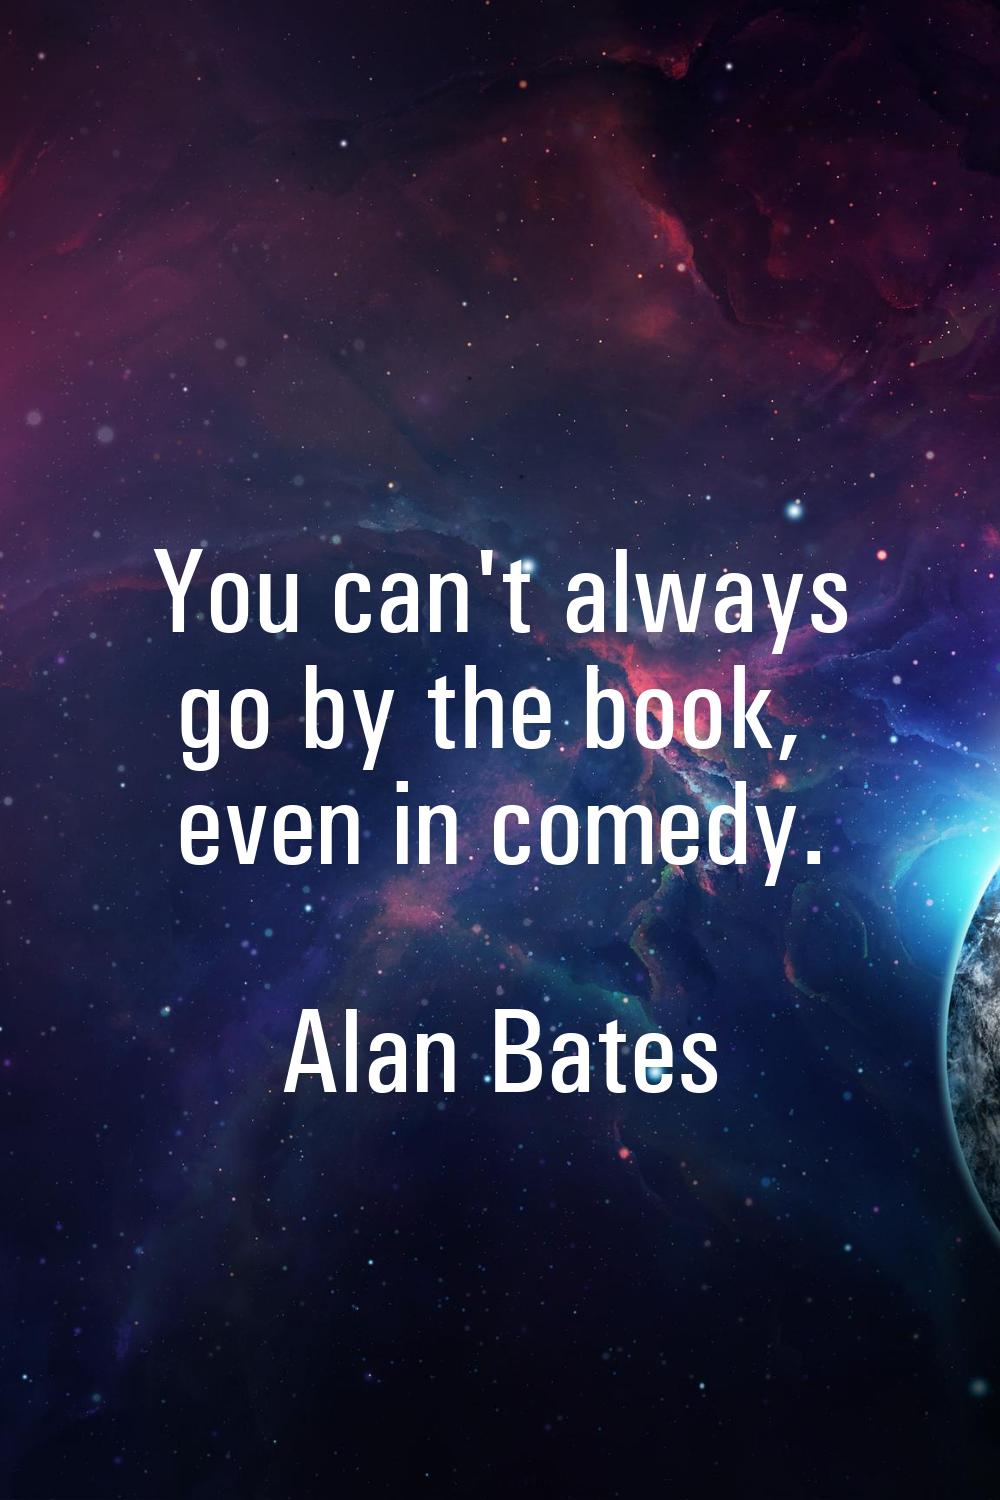 You can't always go by the book, even in comedy.